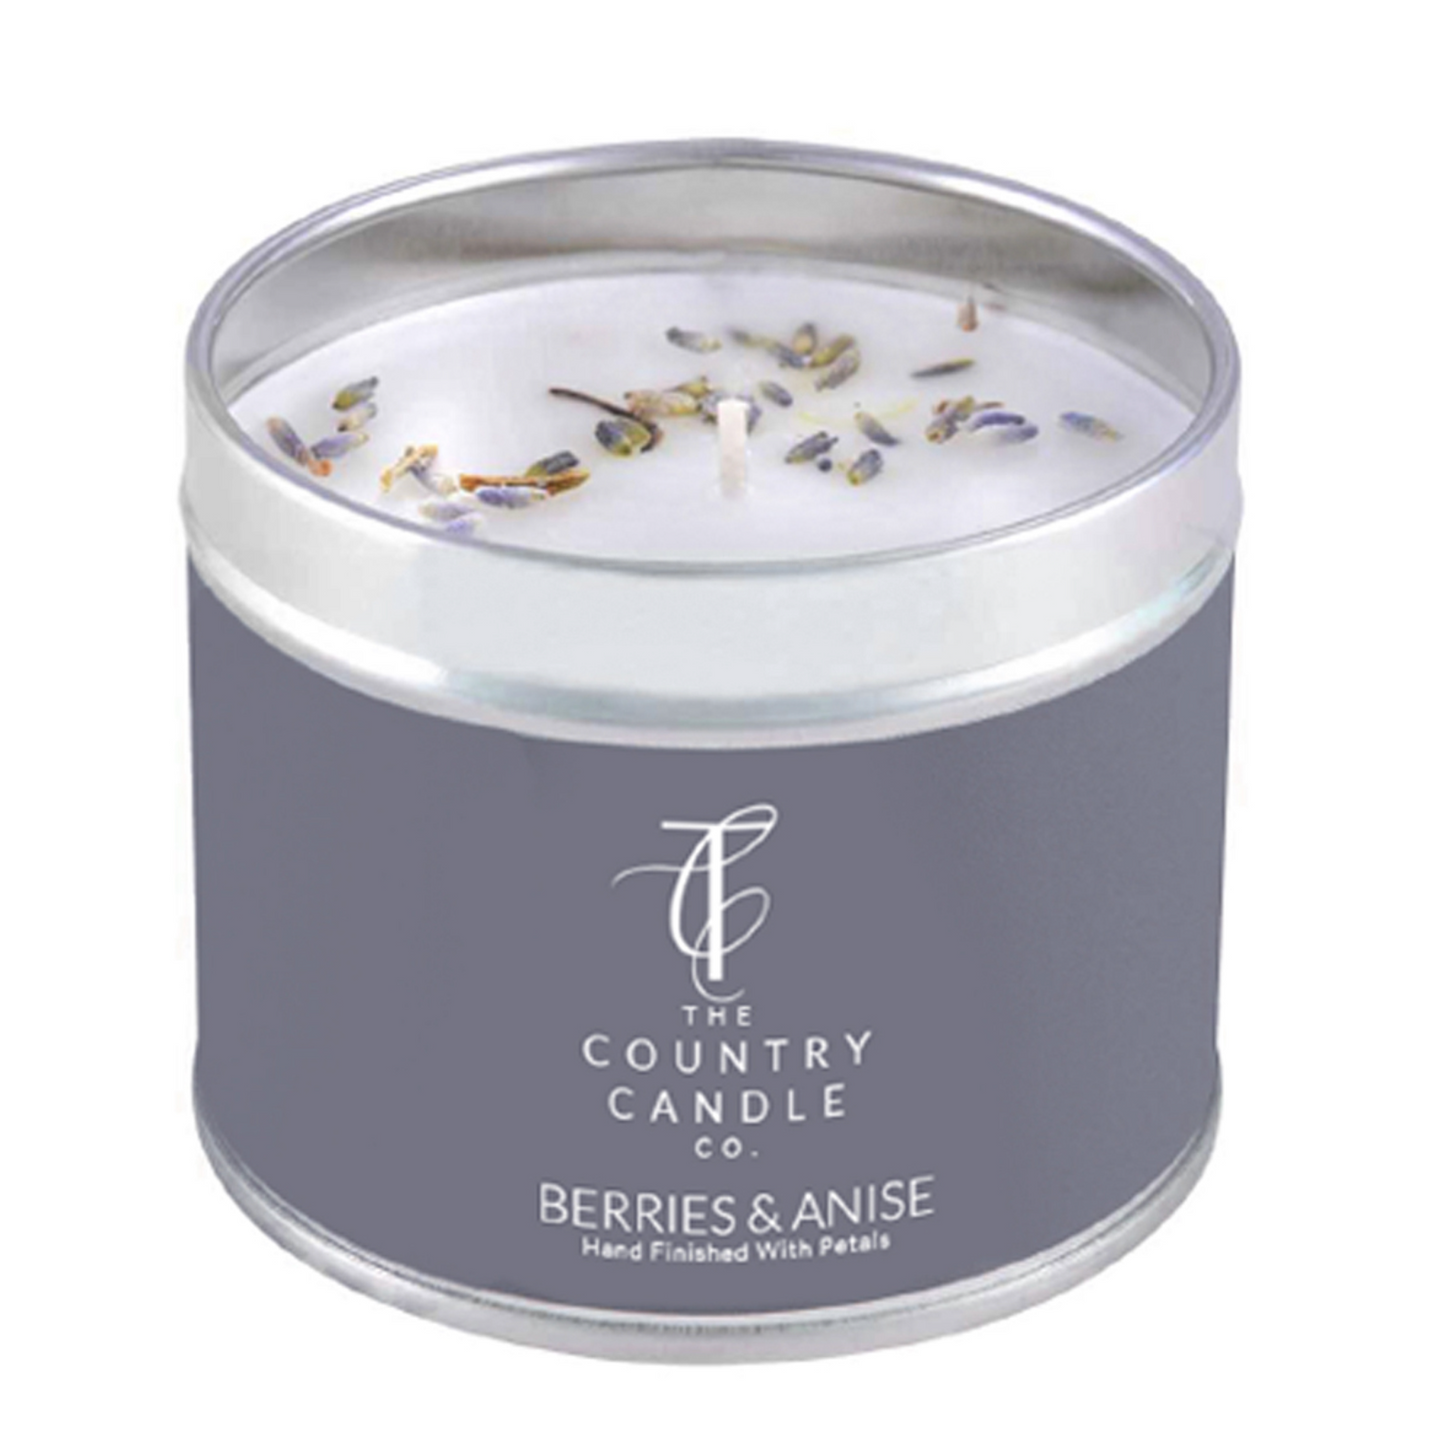 Country Candle - Berries & Anise Tin Candle